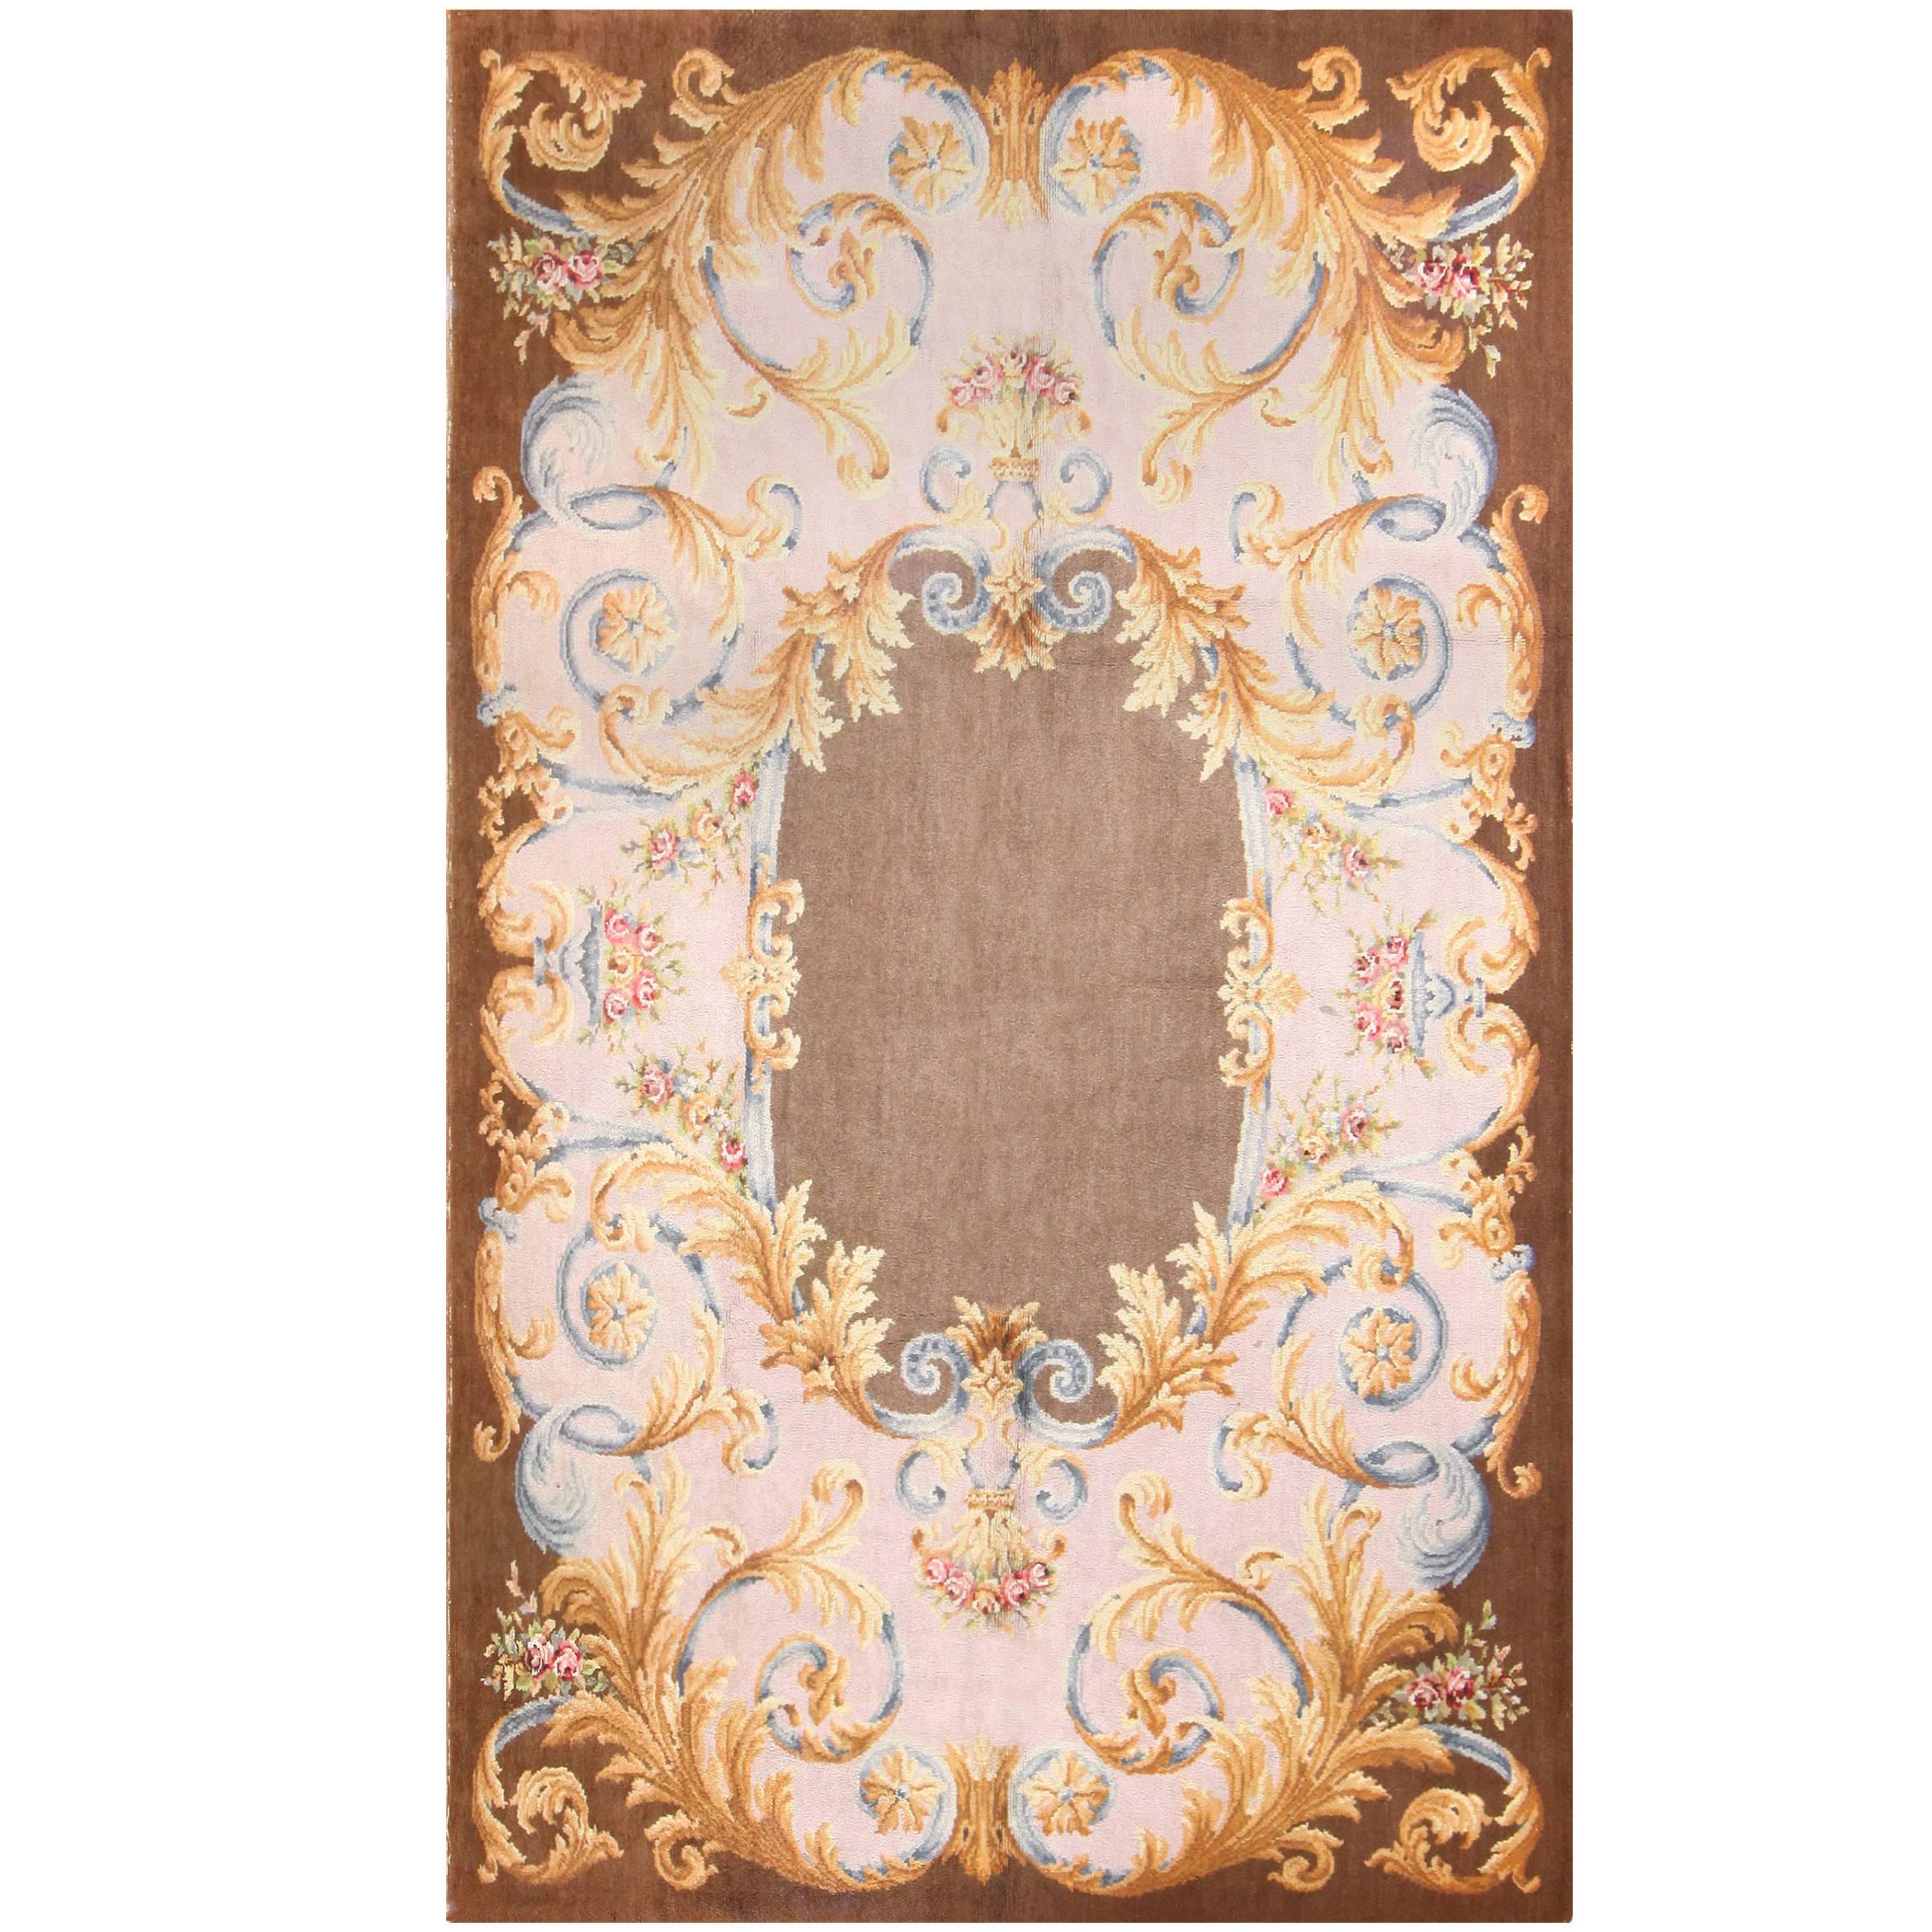 Large Antique Savonnerie French Rug. Size: 10 ft 2 in x 17 ft (3.1 m x 5.18 m)